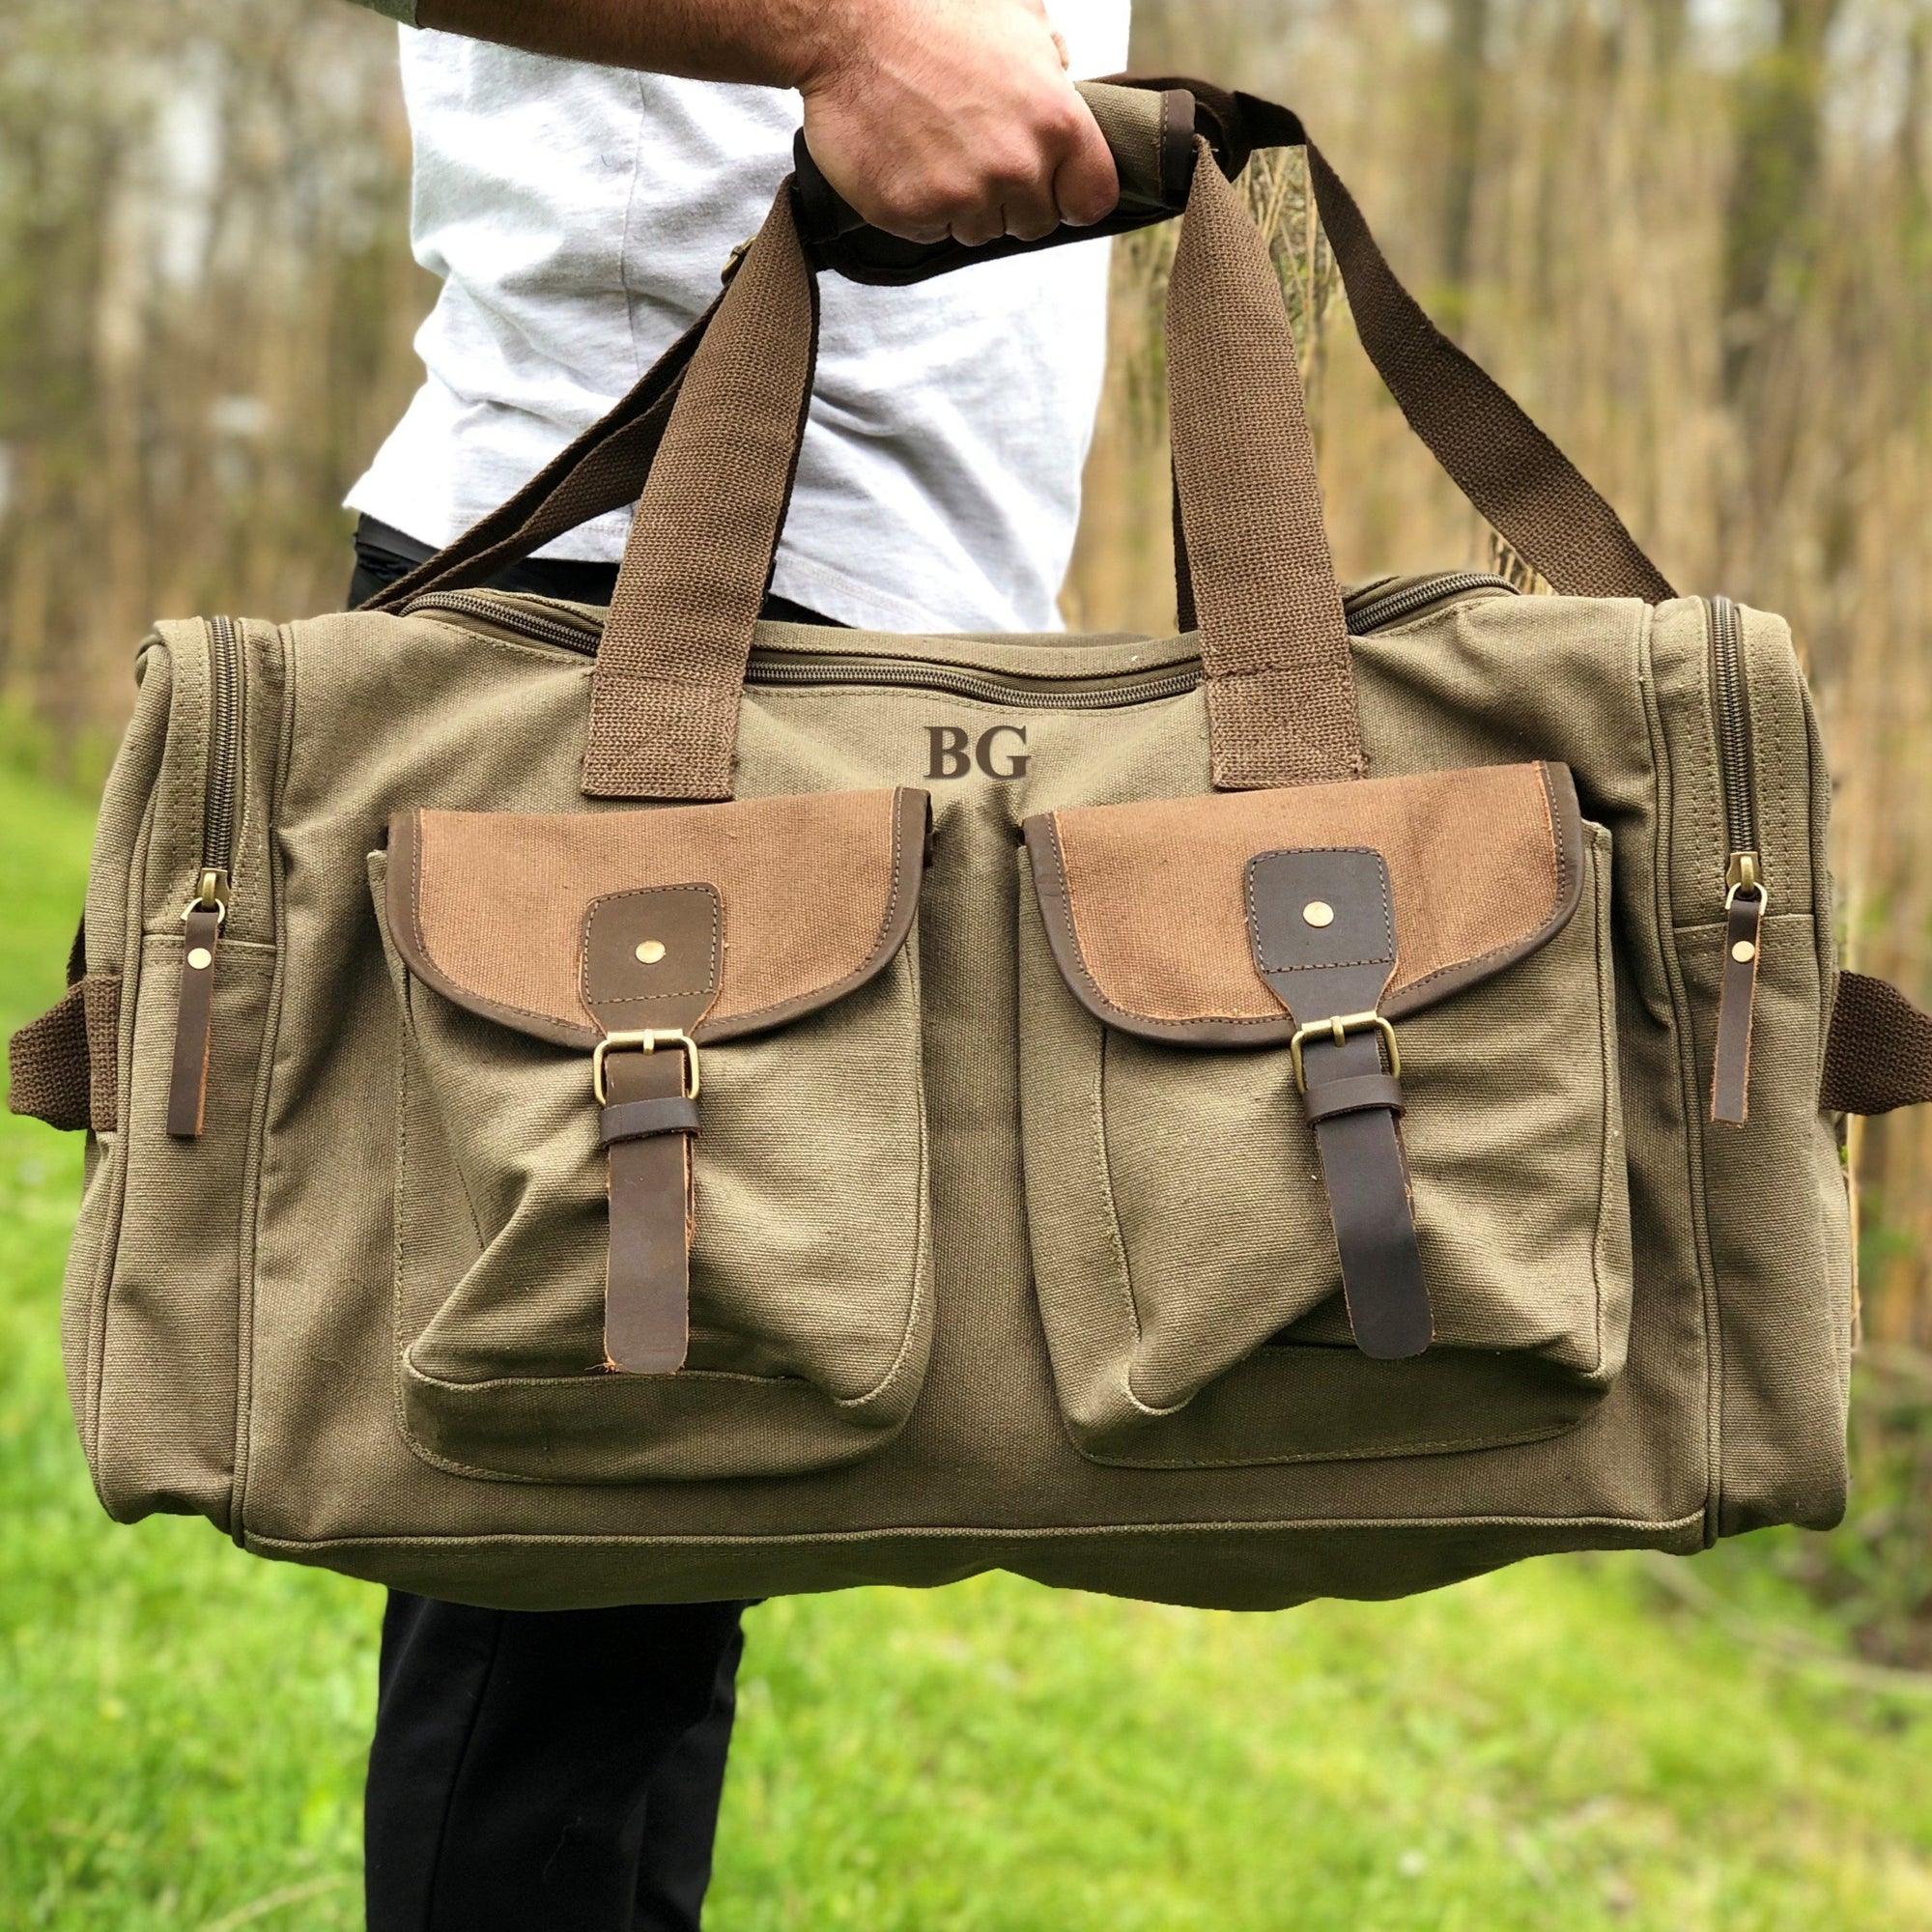 Muscle Duffle Personalized Duffle Bag For Men with Monogram - Groovy Guy  Gifts